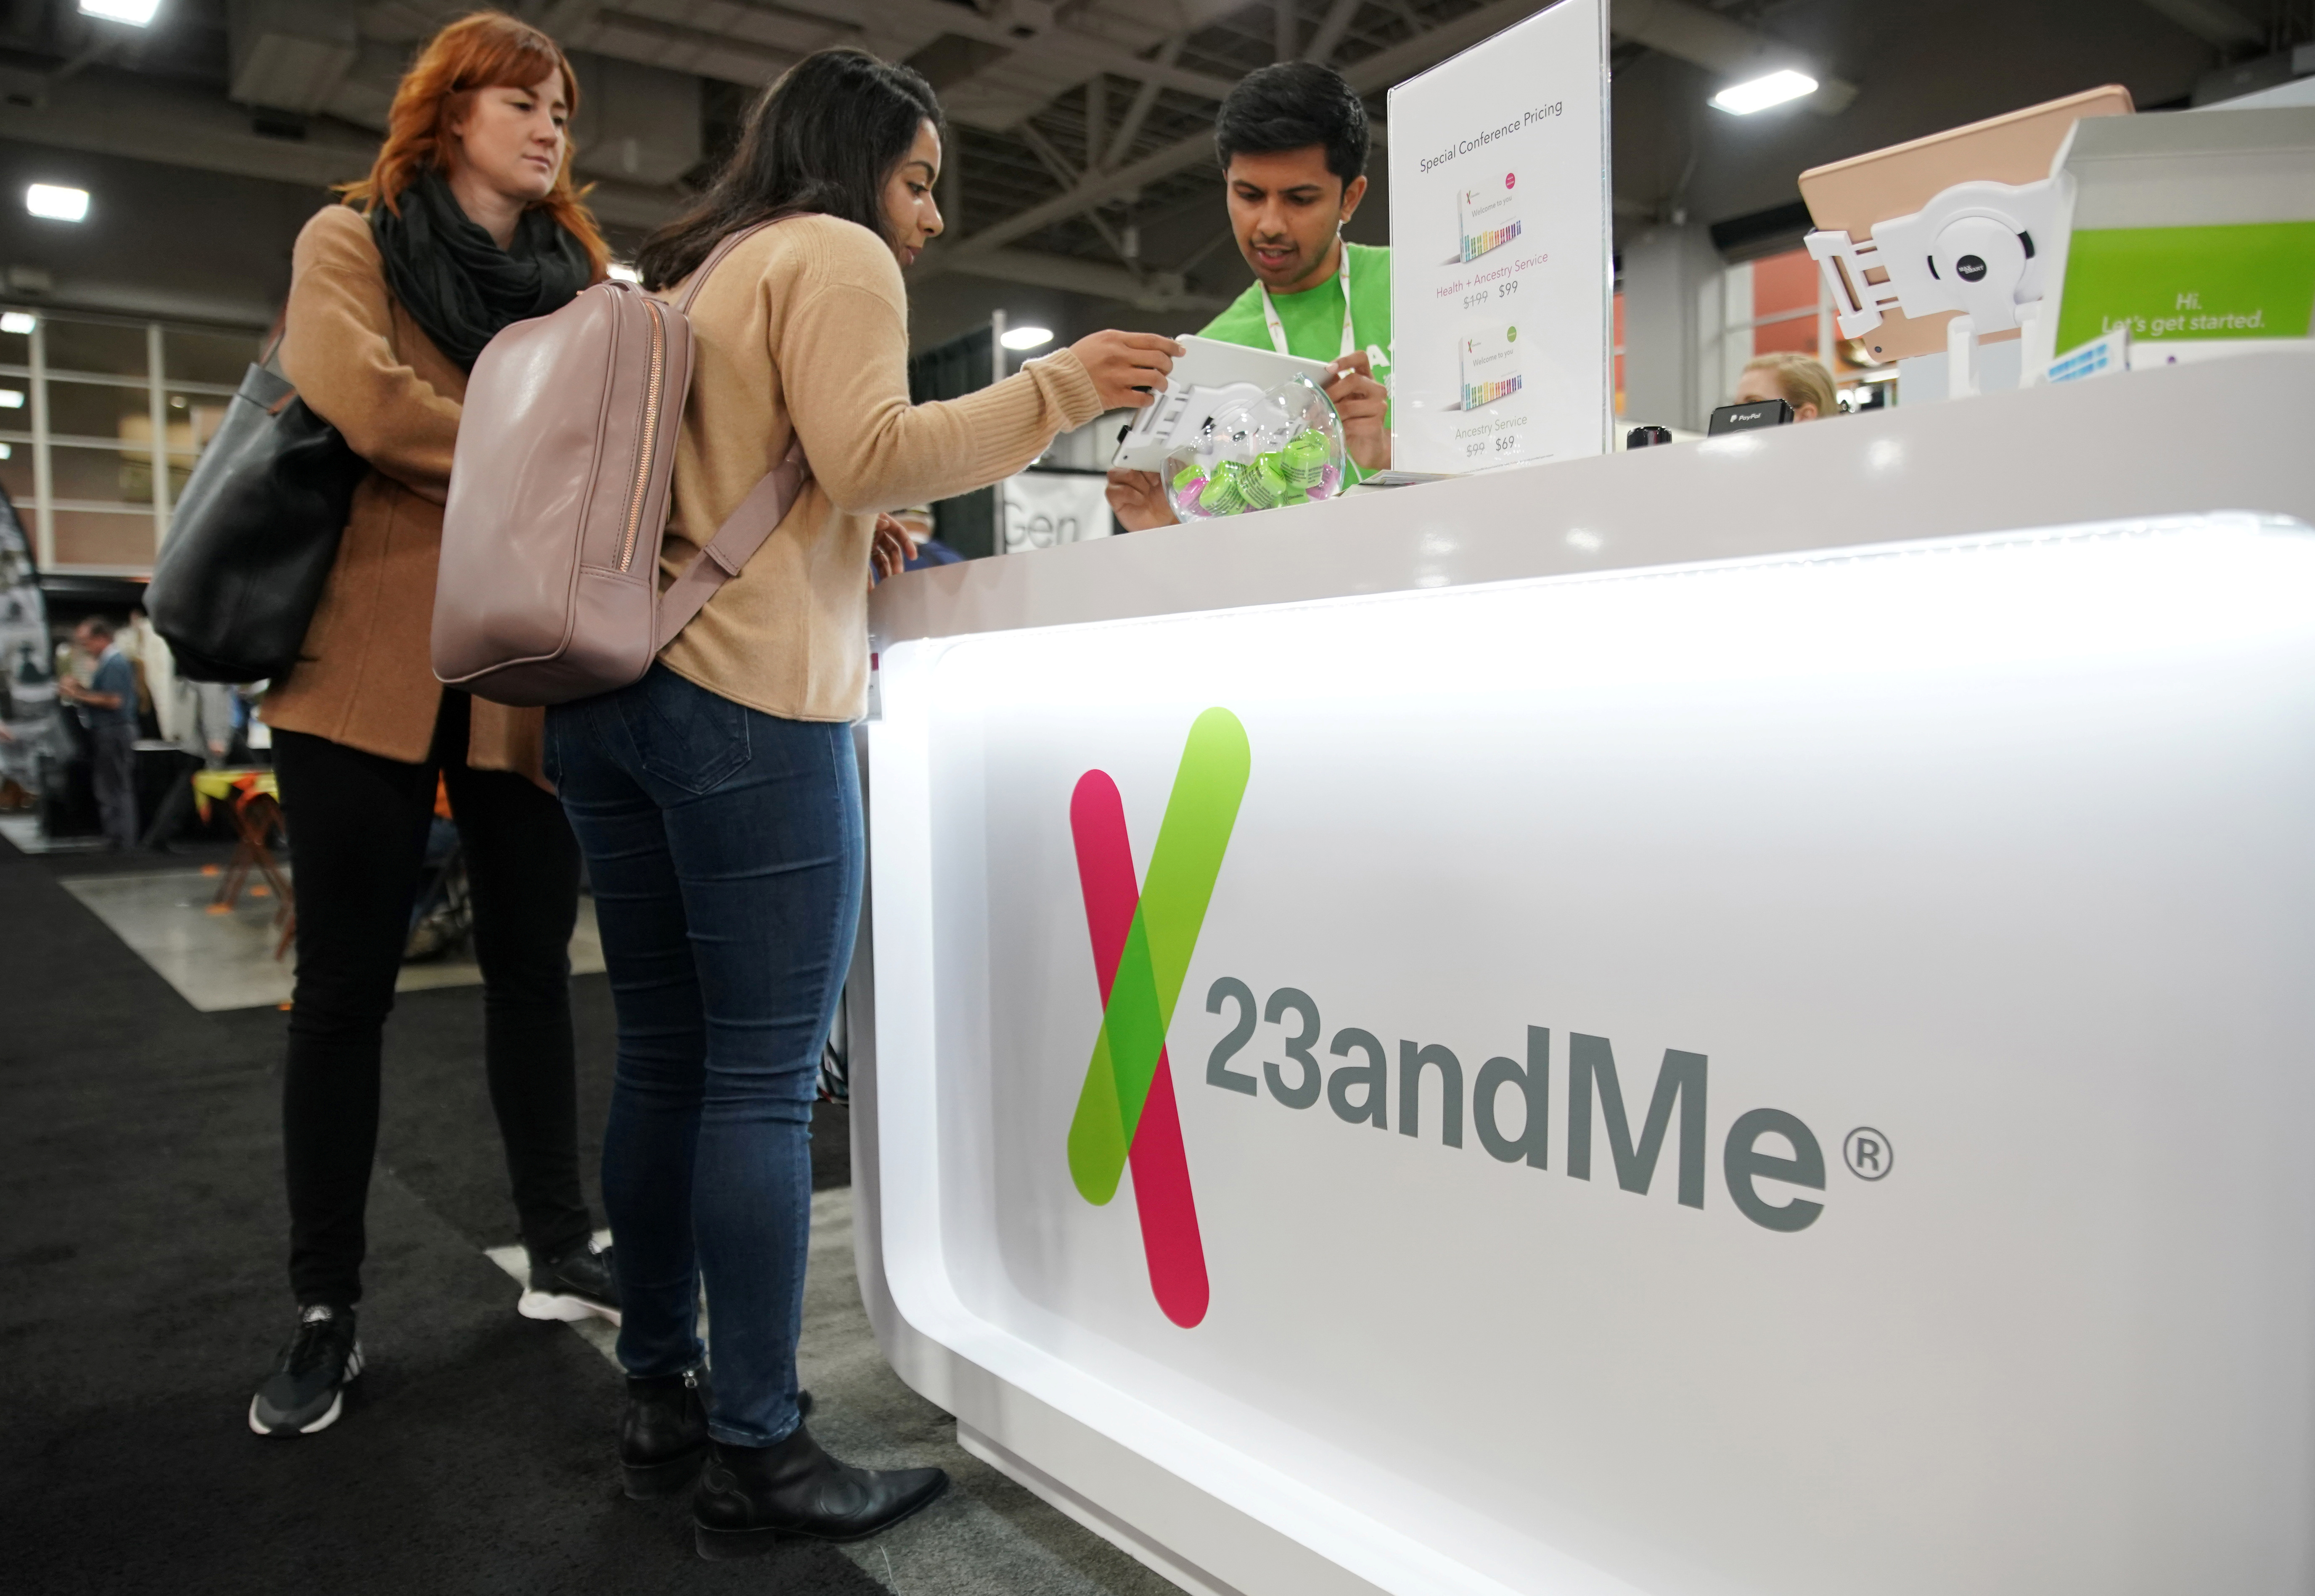 Attendees purchase DNA kits at the 23andMe booth at the RootsTech annual genealogical event in Salt Lake City